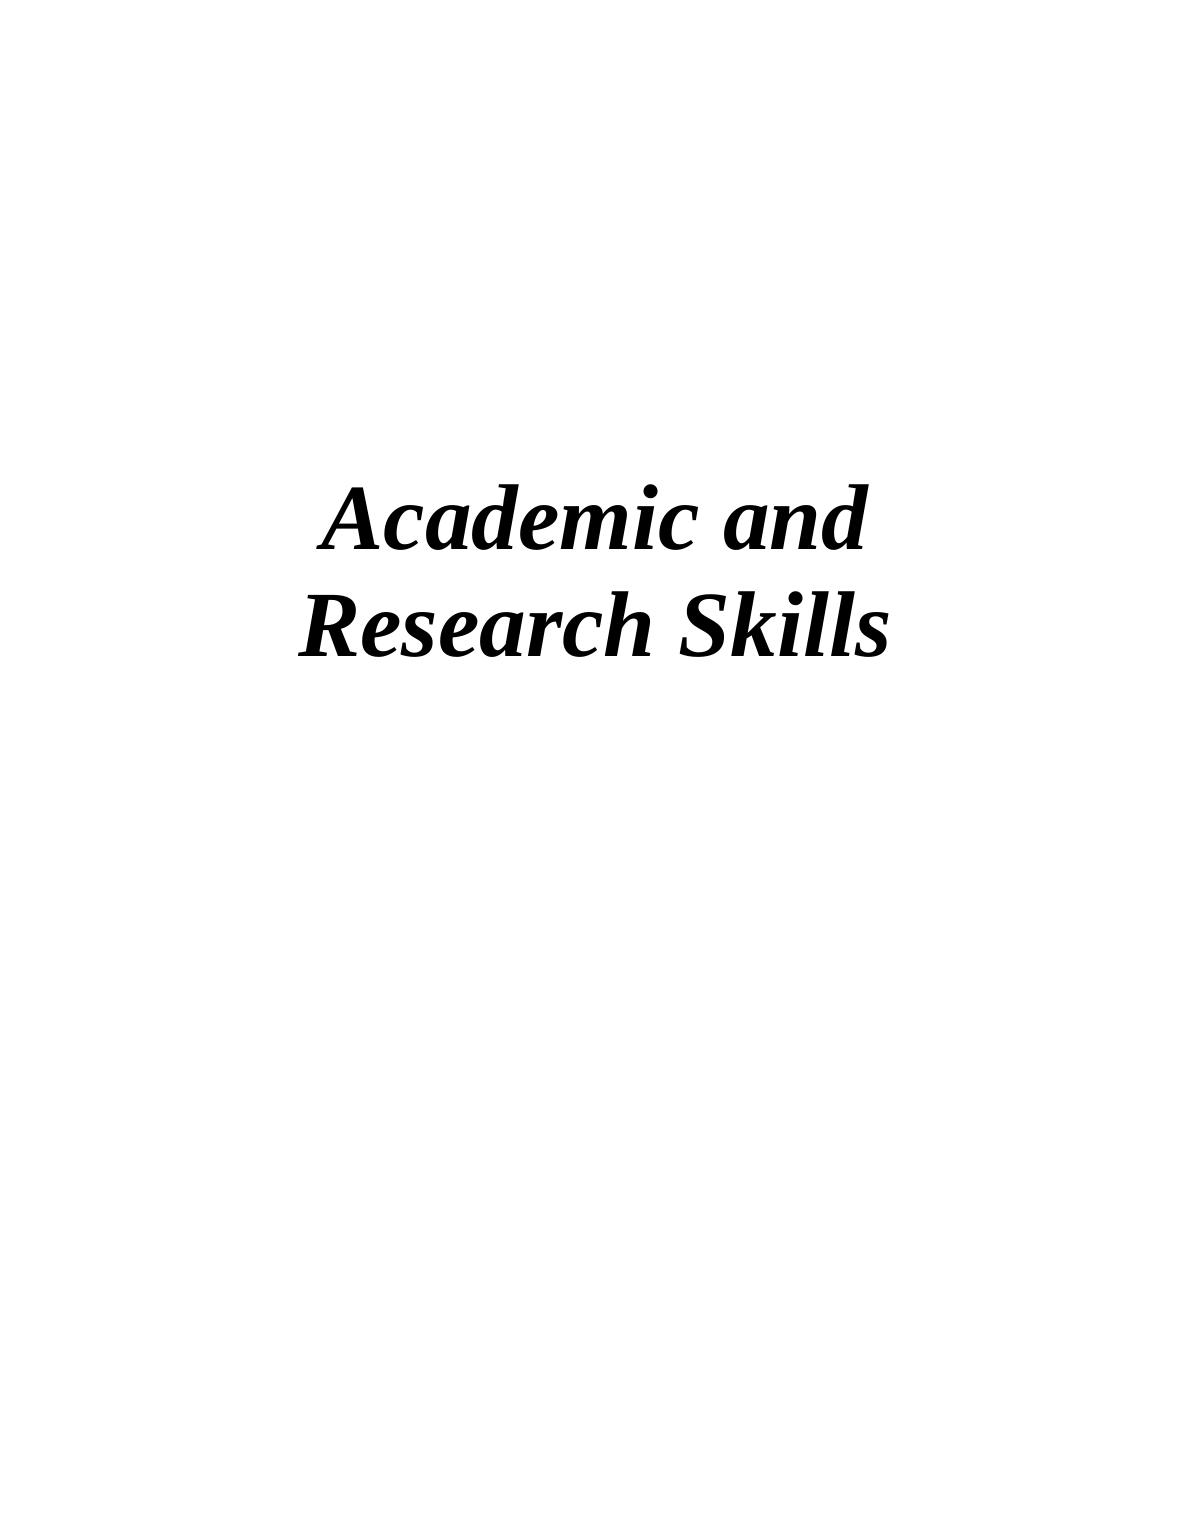 Academic and Research Skills._1